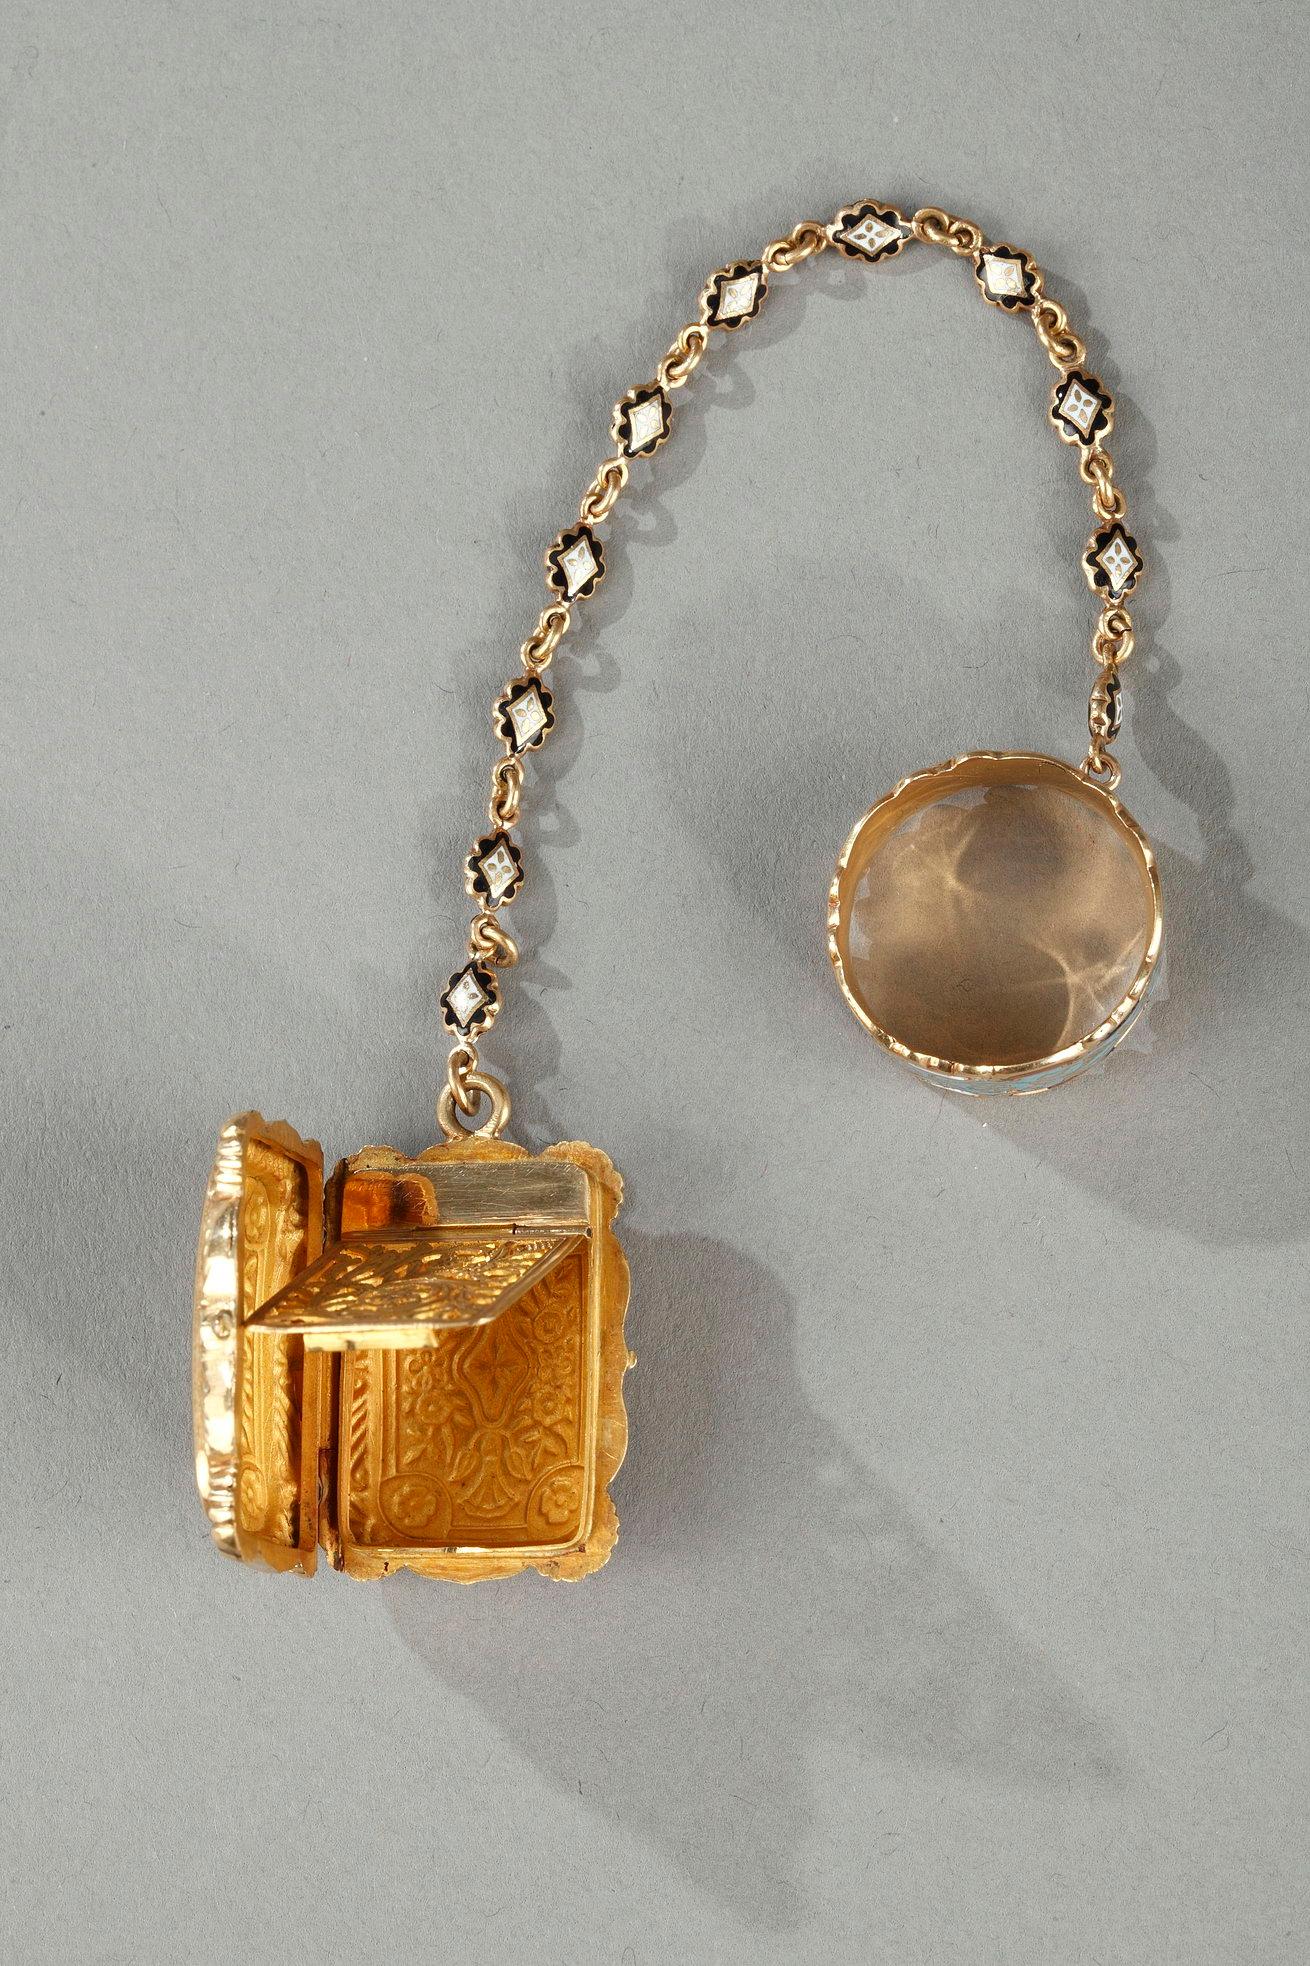 A rectangular vinaigrette in 18-carat gold enameled on both sides with a brightly colored floral composition. A delicate chain connects the vinaigrette to an elegantly enameled ring, highlighted with scrollwork and golden floral motifs. The interior